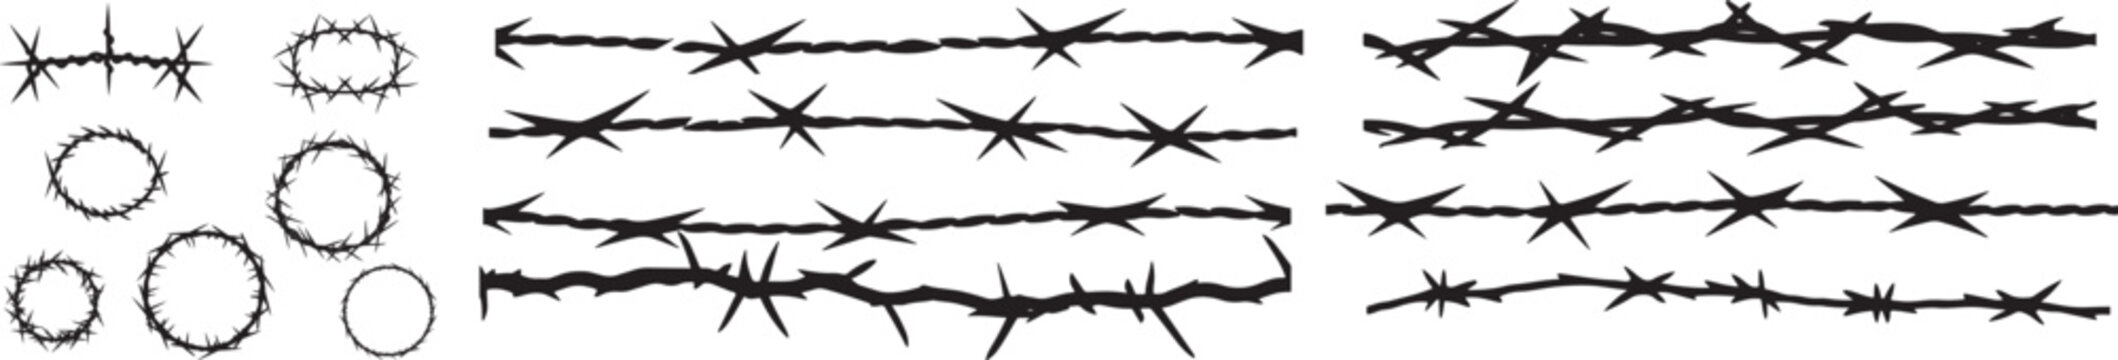 Set of barbed wire